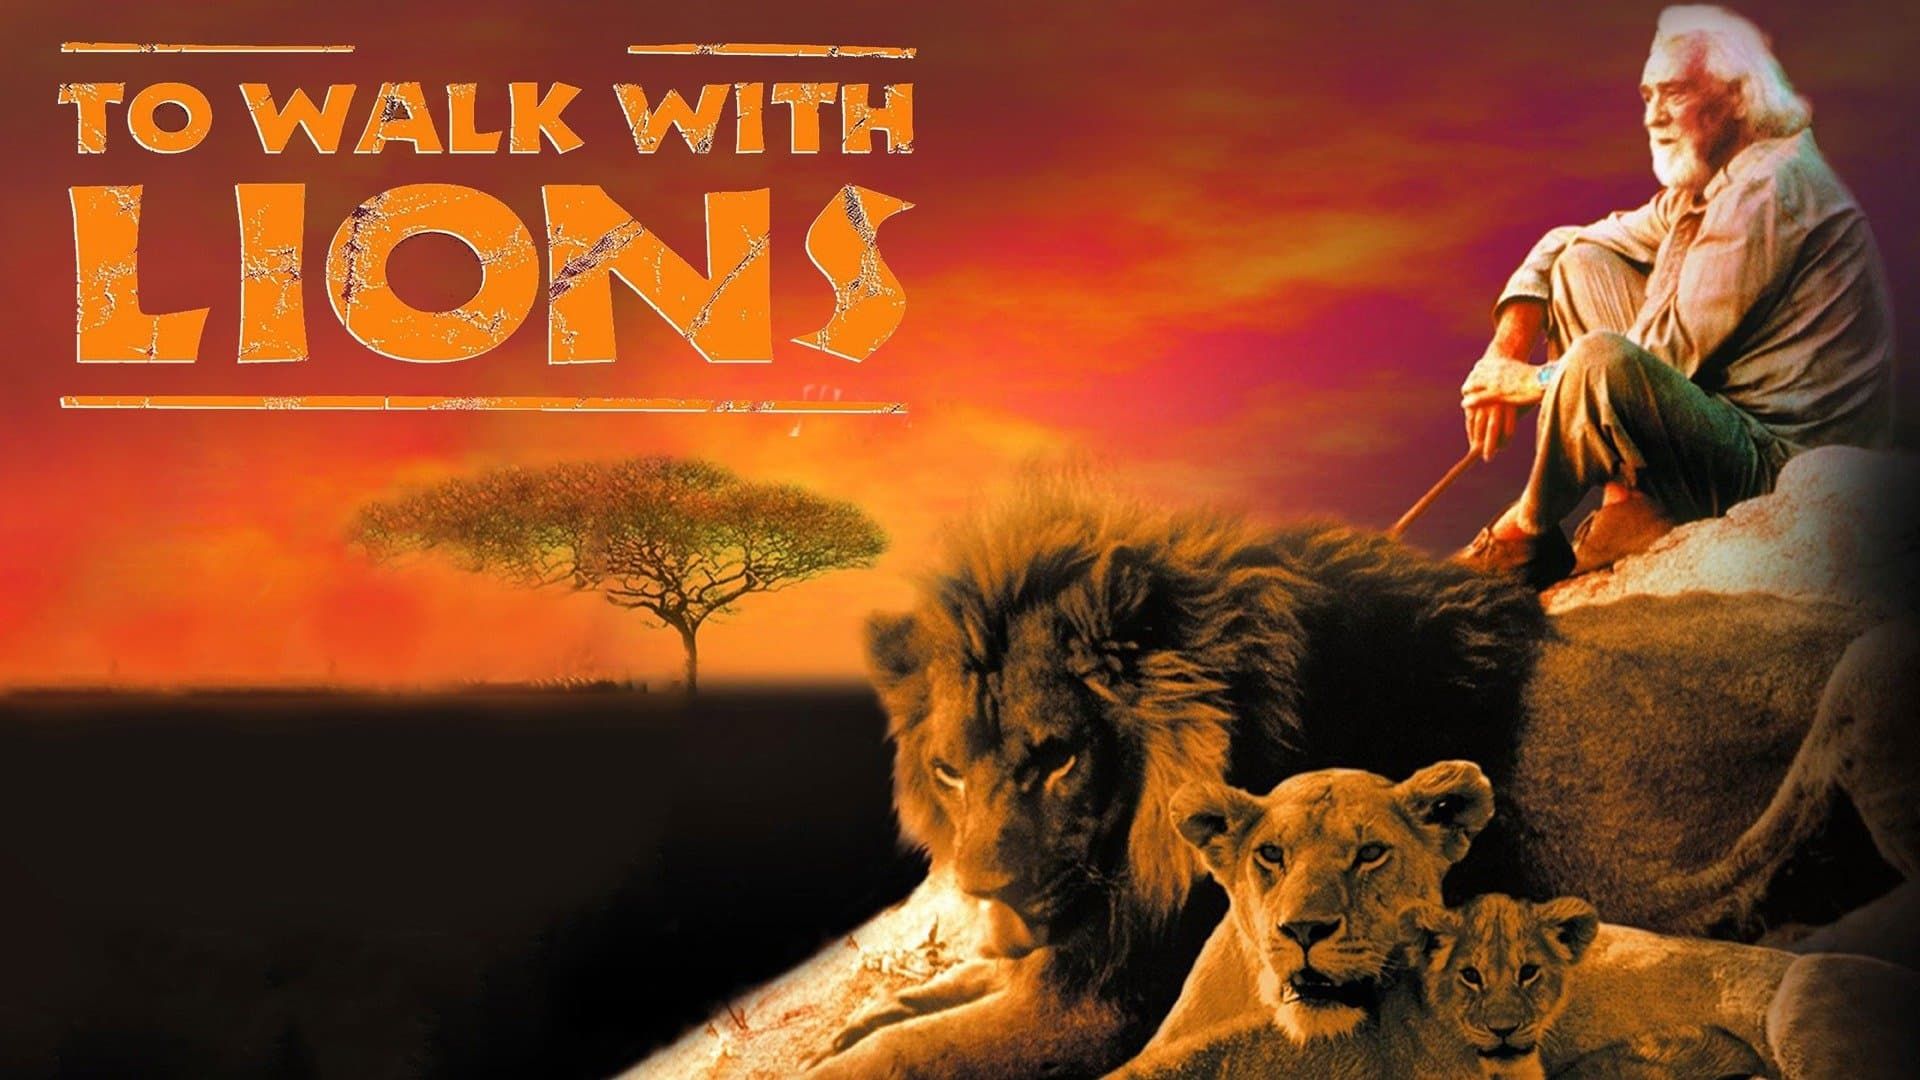 To Walk with Lions background